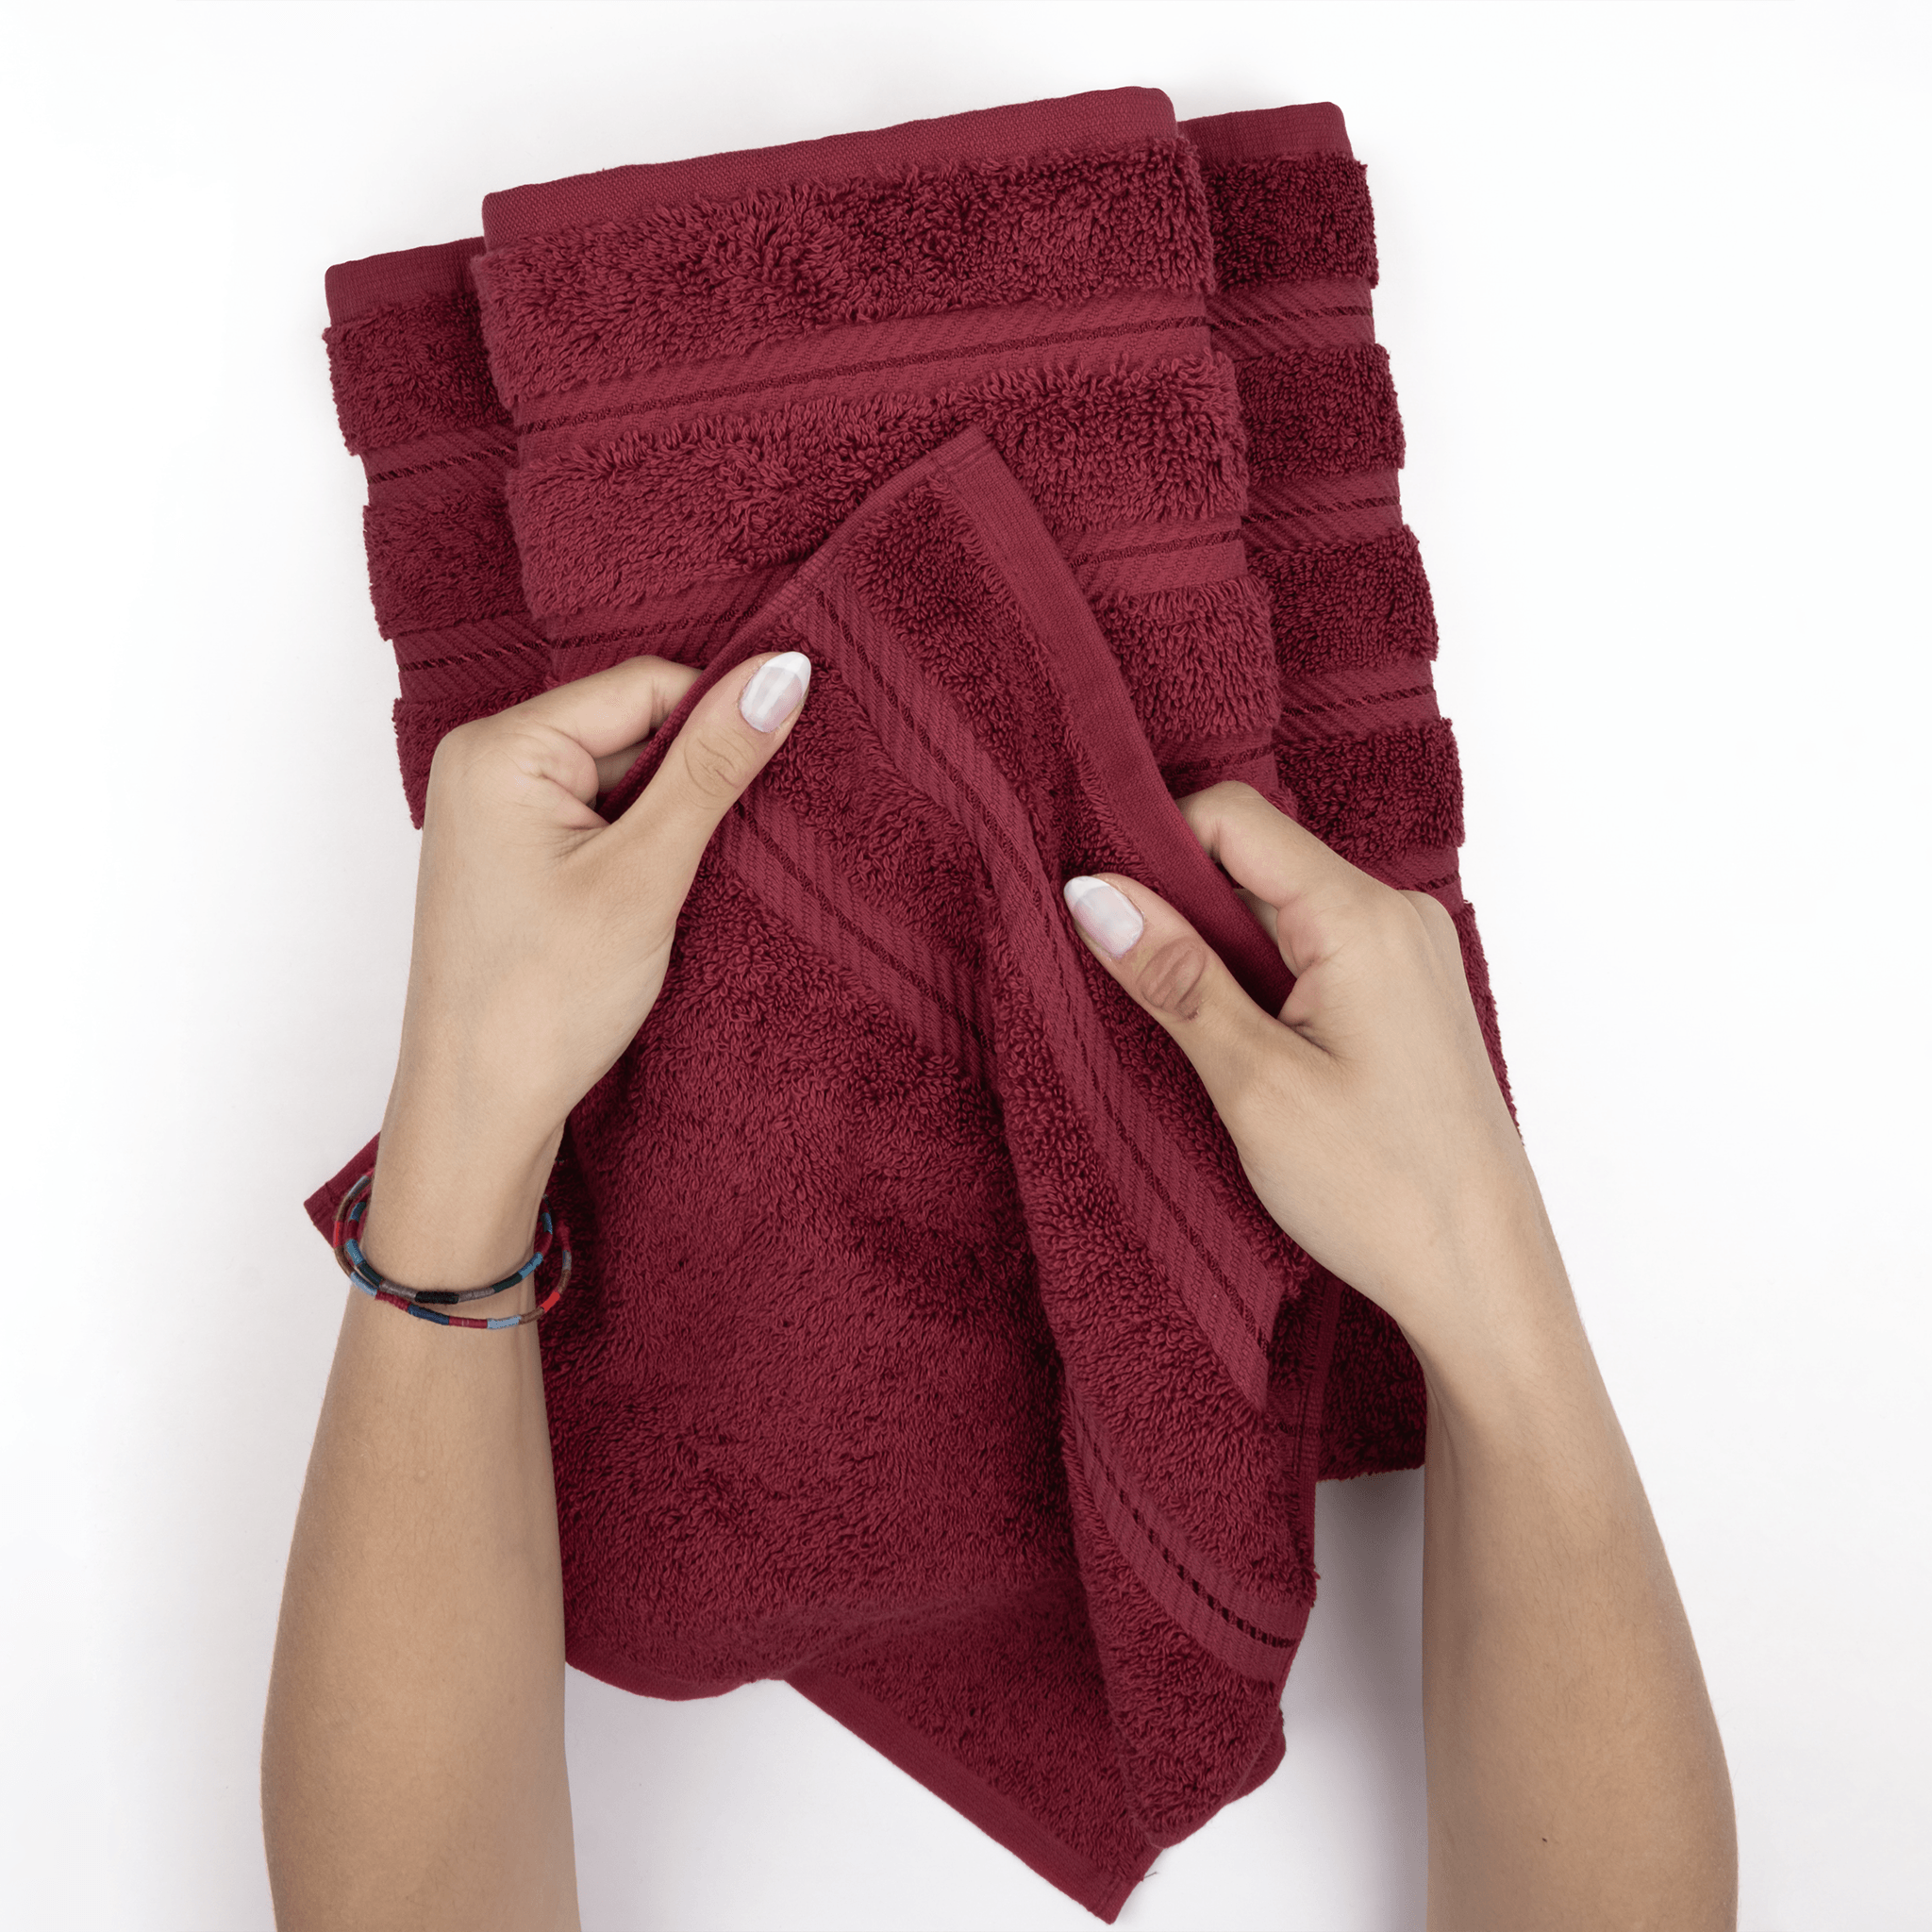 American Soft Linen American Soft Linen Washcloth Set 100% Turkish Cotton 4  Piece Face Hand Towels for Bathroom and Kitchen - Burgundy Red  Edis4WCBordoE61 - The Home Depot